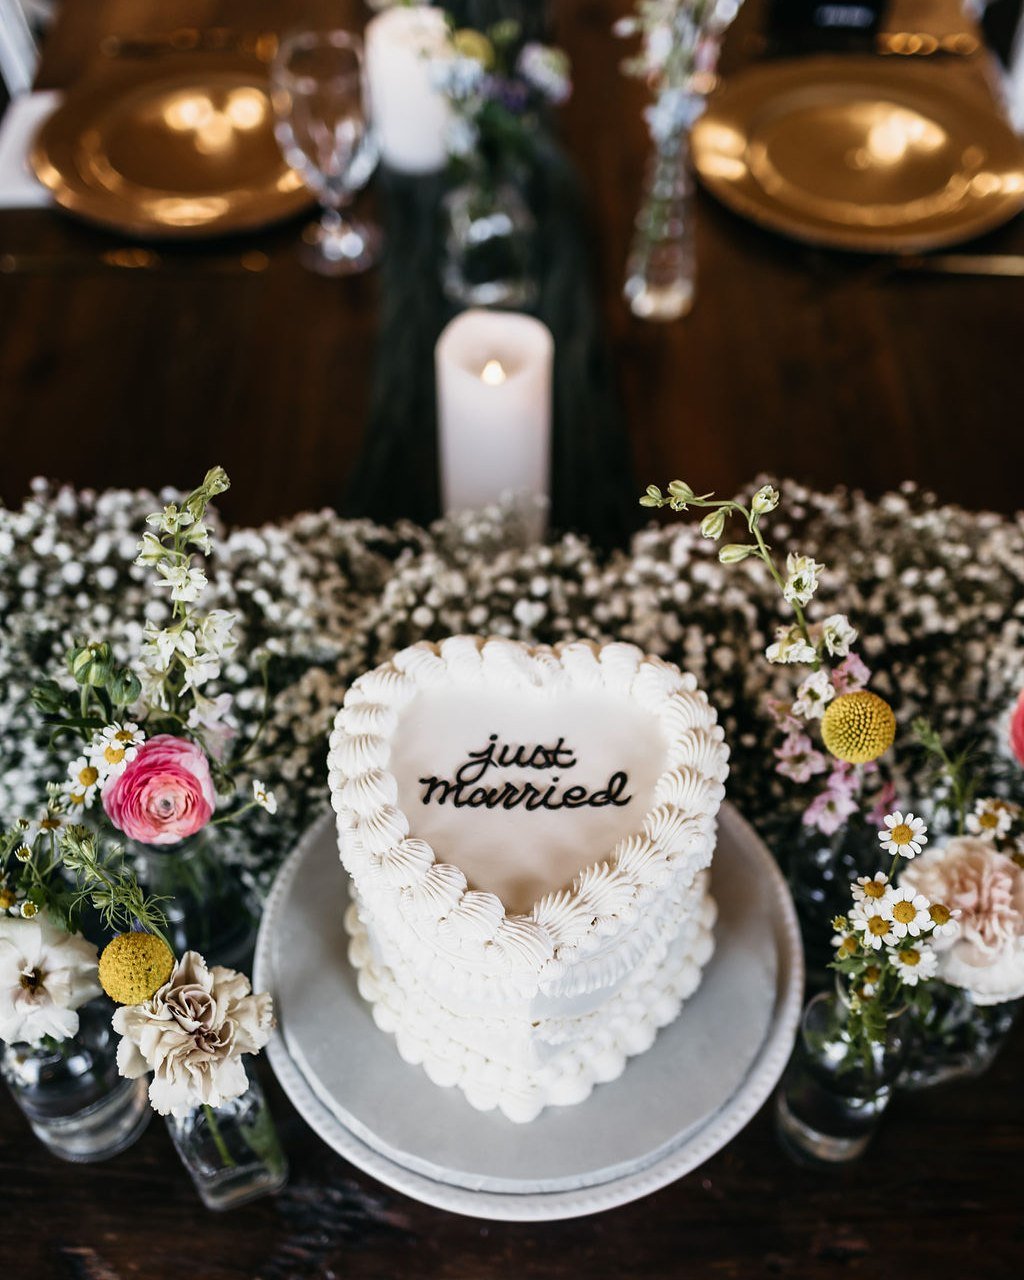 💍Planning a wedding💍 and looking for some decor inspo?✨ Check out these photos and be sure to save this post.💕✨ GORGEOUS!

⬇️Vendor Team⬇️
Wedding Photographer: @jessandjennphotography
Wedding Day Caterer: @grazecatering
Florist: @rootandrelic
Cak